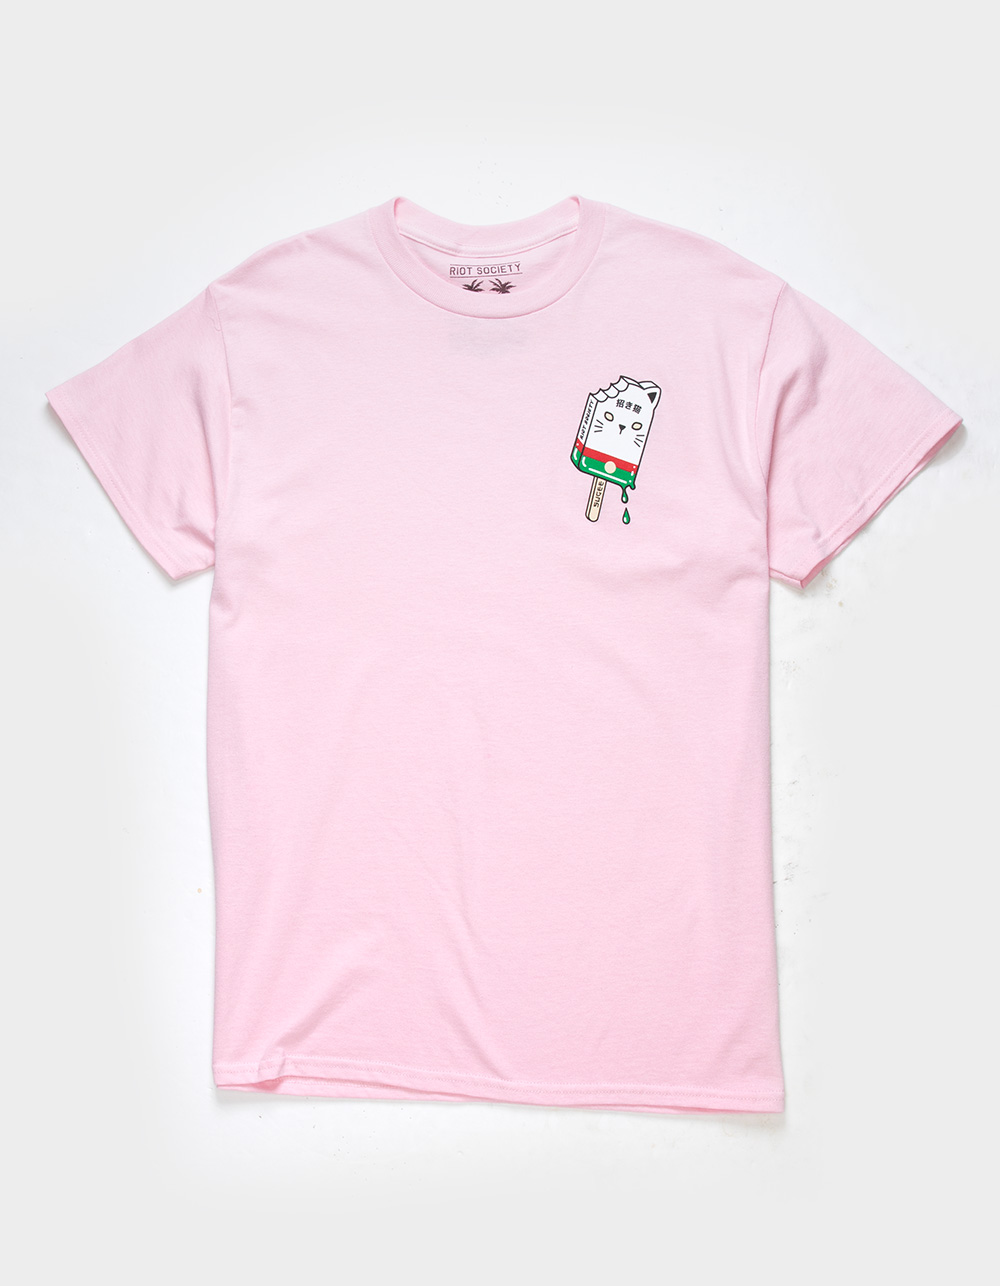 RIOT SOCIETY Sugee Cat Popsicle Mens Tee - LIGHT PINK | Tillys